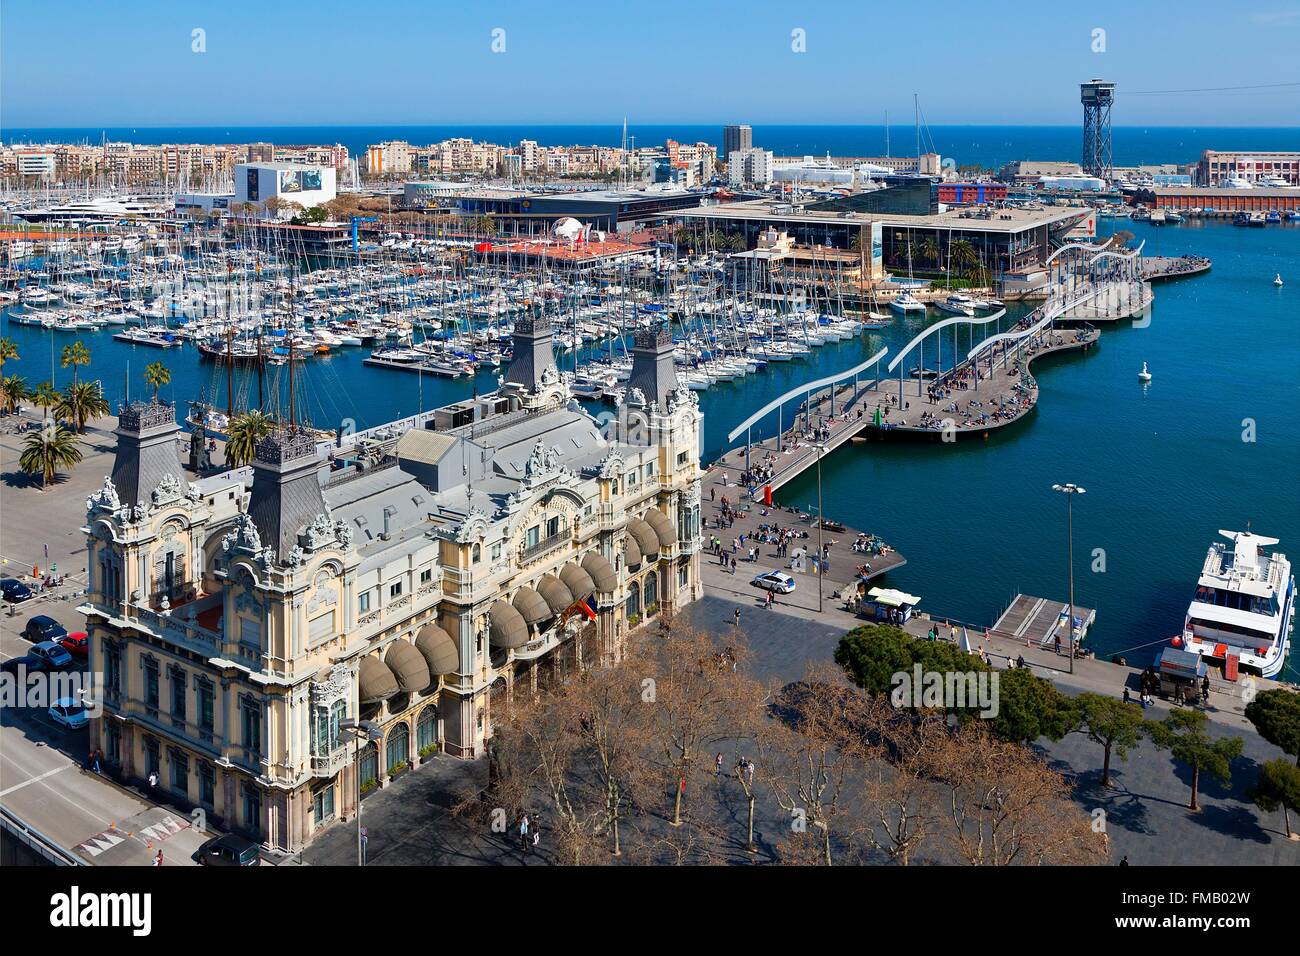 Spain, Catalonia, Barcelona, Panoramic view of the Port Vell, the Old Harbour, and the Barceloneta district Stock Photo